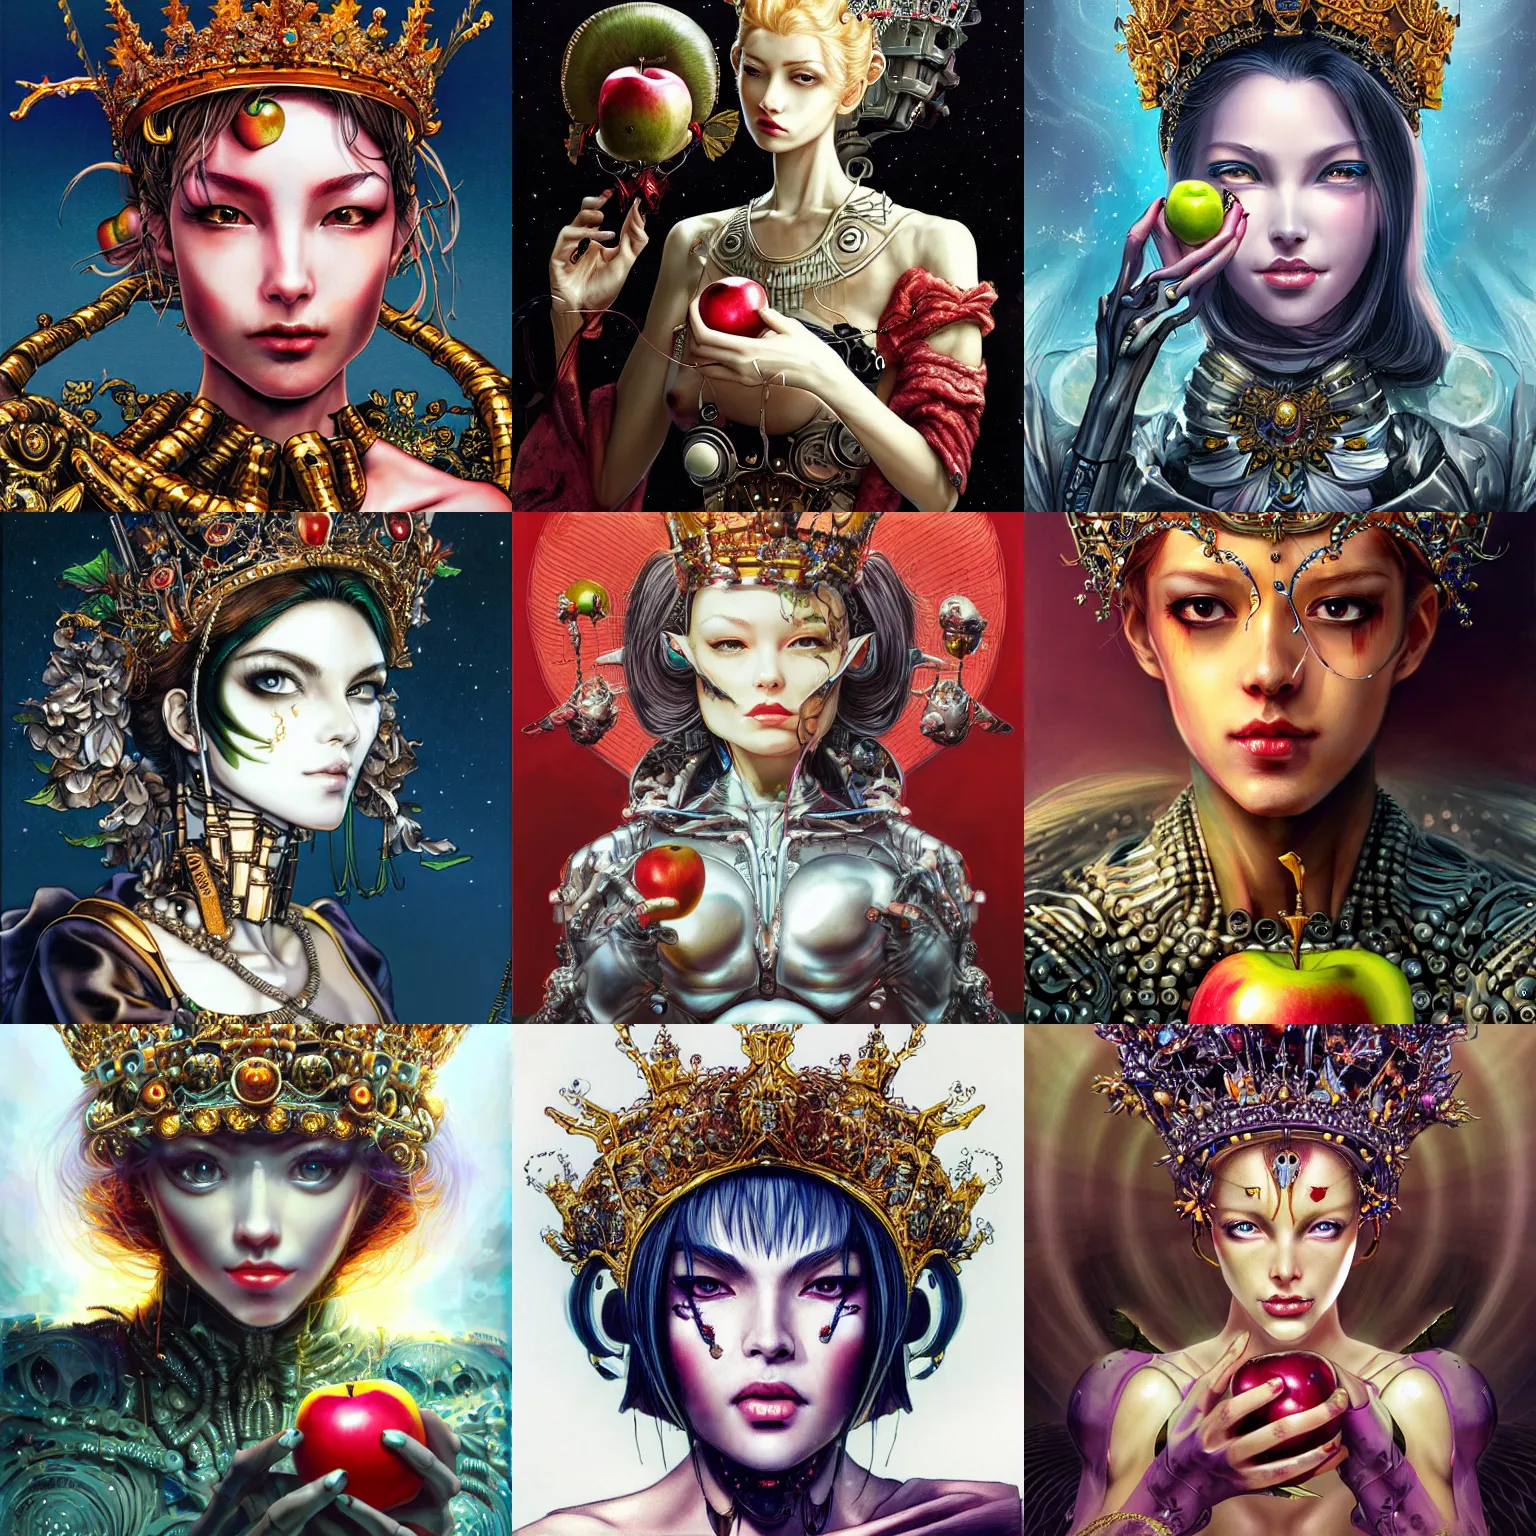 Prompt: potrait of a beautiful cyborg - face queen wearing a luxurious crown is holding an apple in her hand, face is highly detailed, by masamune shirow, ayami kojima, josan gonzalez, yoshitaka amano, dan mumford, barclay shaw